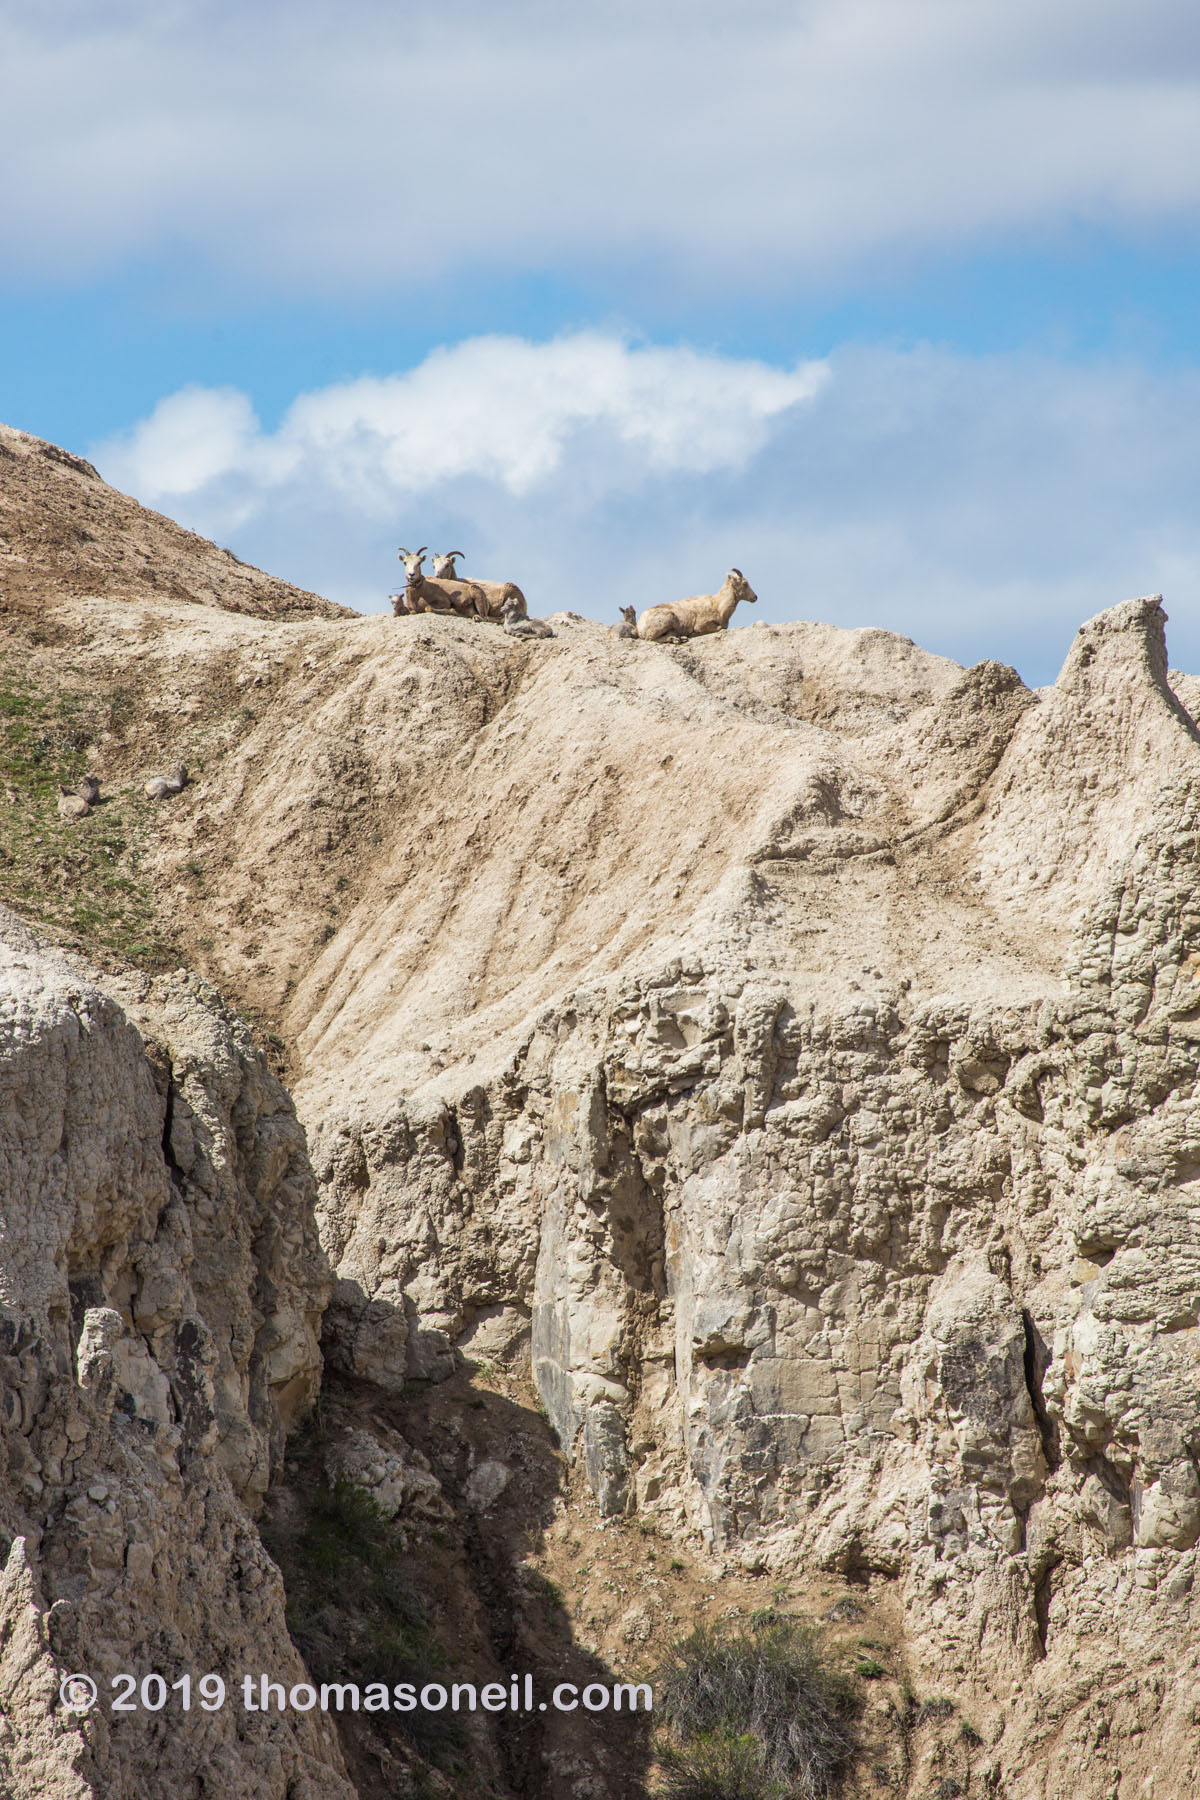 Bighorns on the peak above Ancient Hunters Overlook, Badlands National Park.  There are three ewes and three lambs in this image.  Click for next photo.